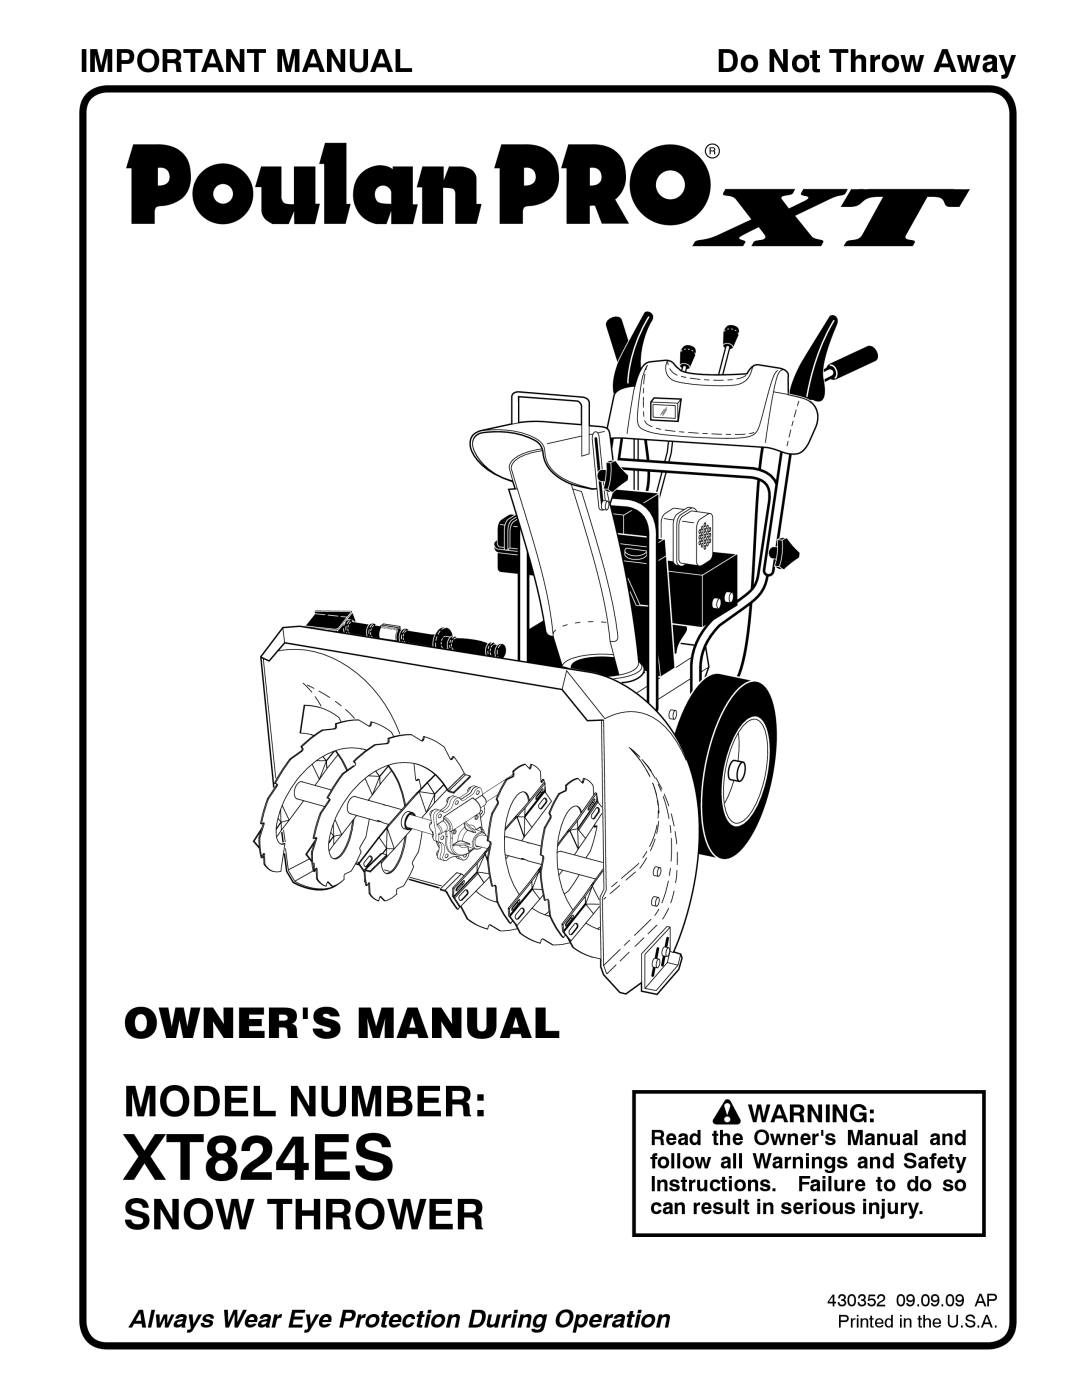 Poulan 96192003301 owner manual Owners Manual Model Number, Snow Thrower, Important Manual, XT824ES, Do Not Throw Away 